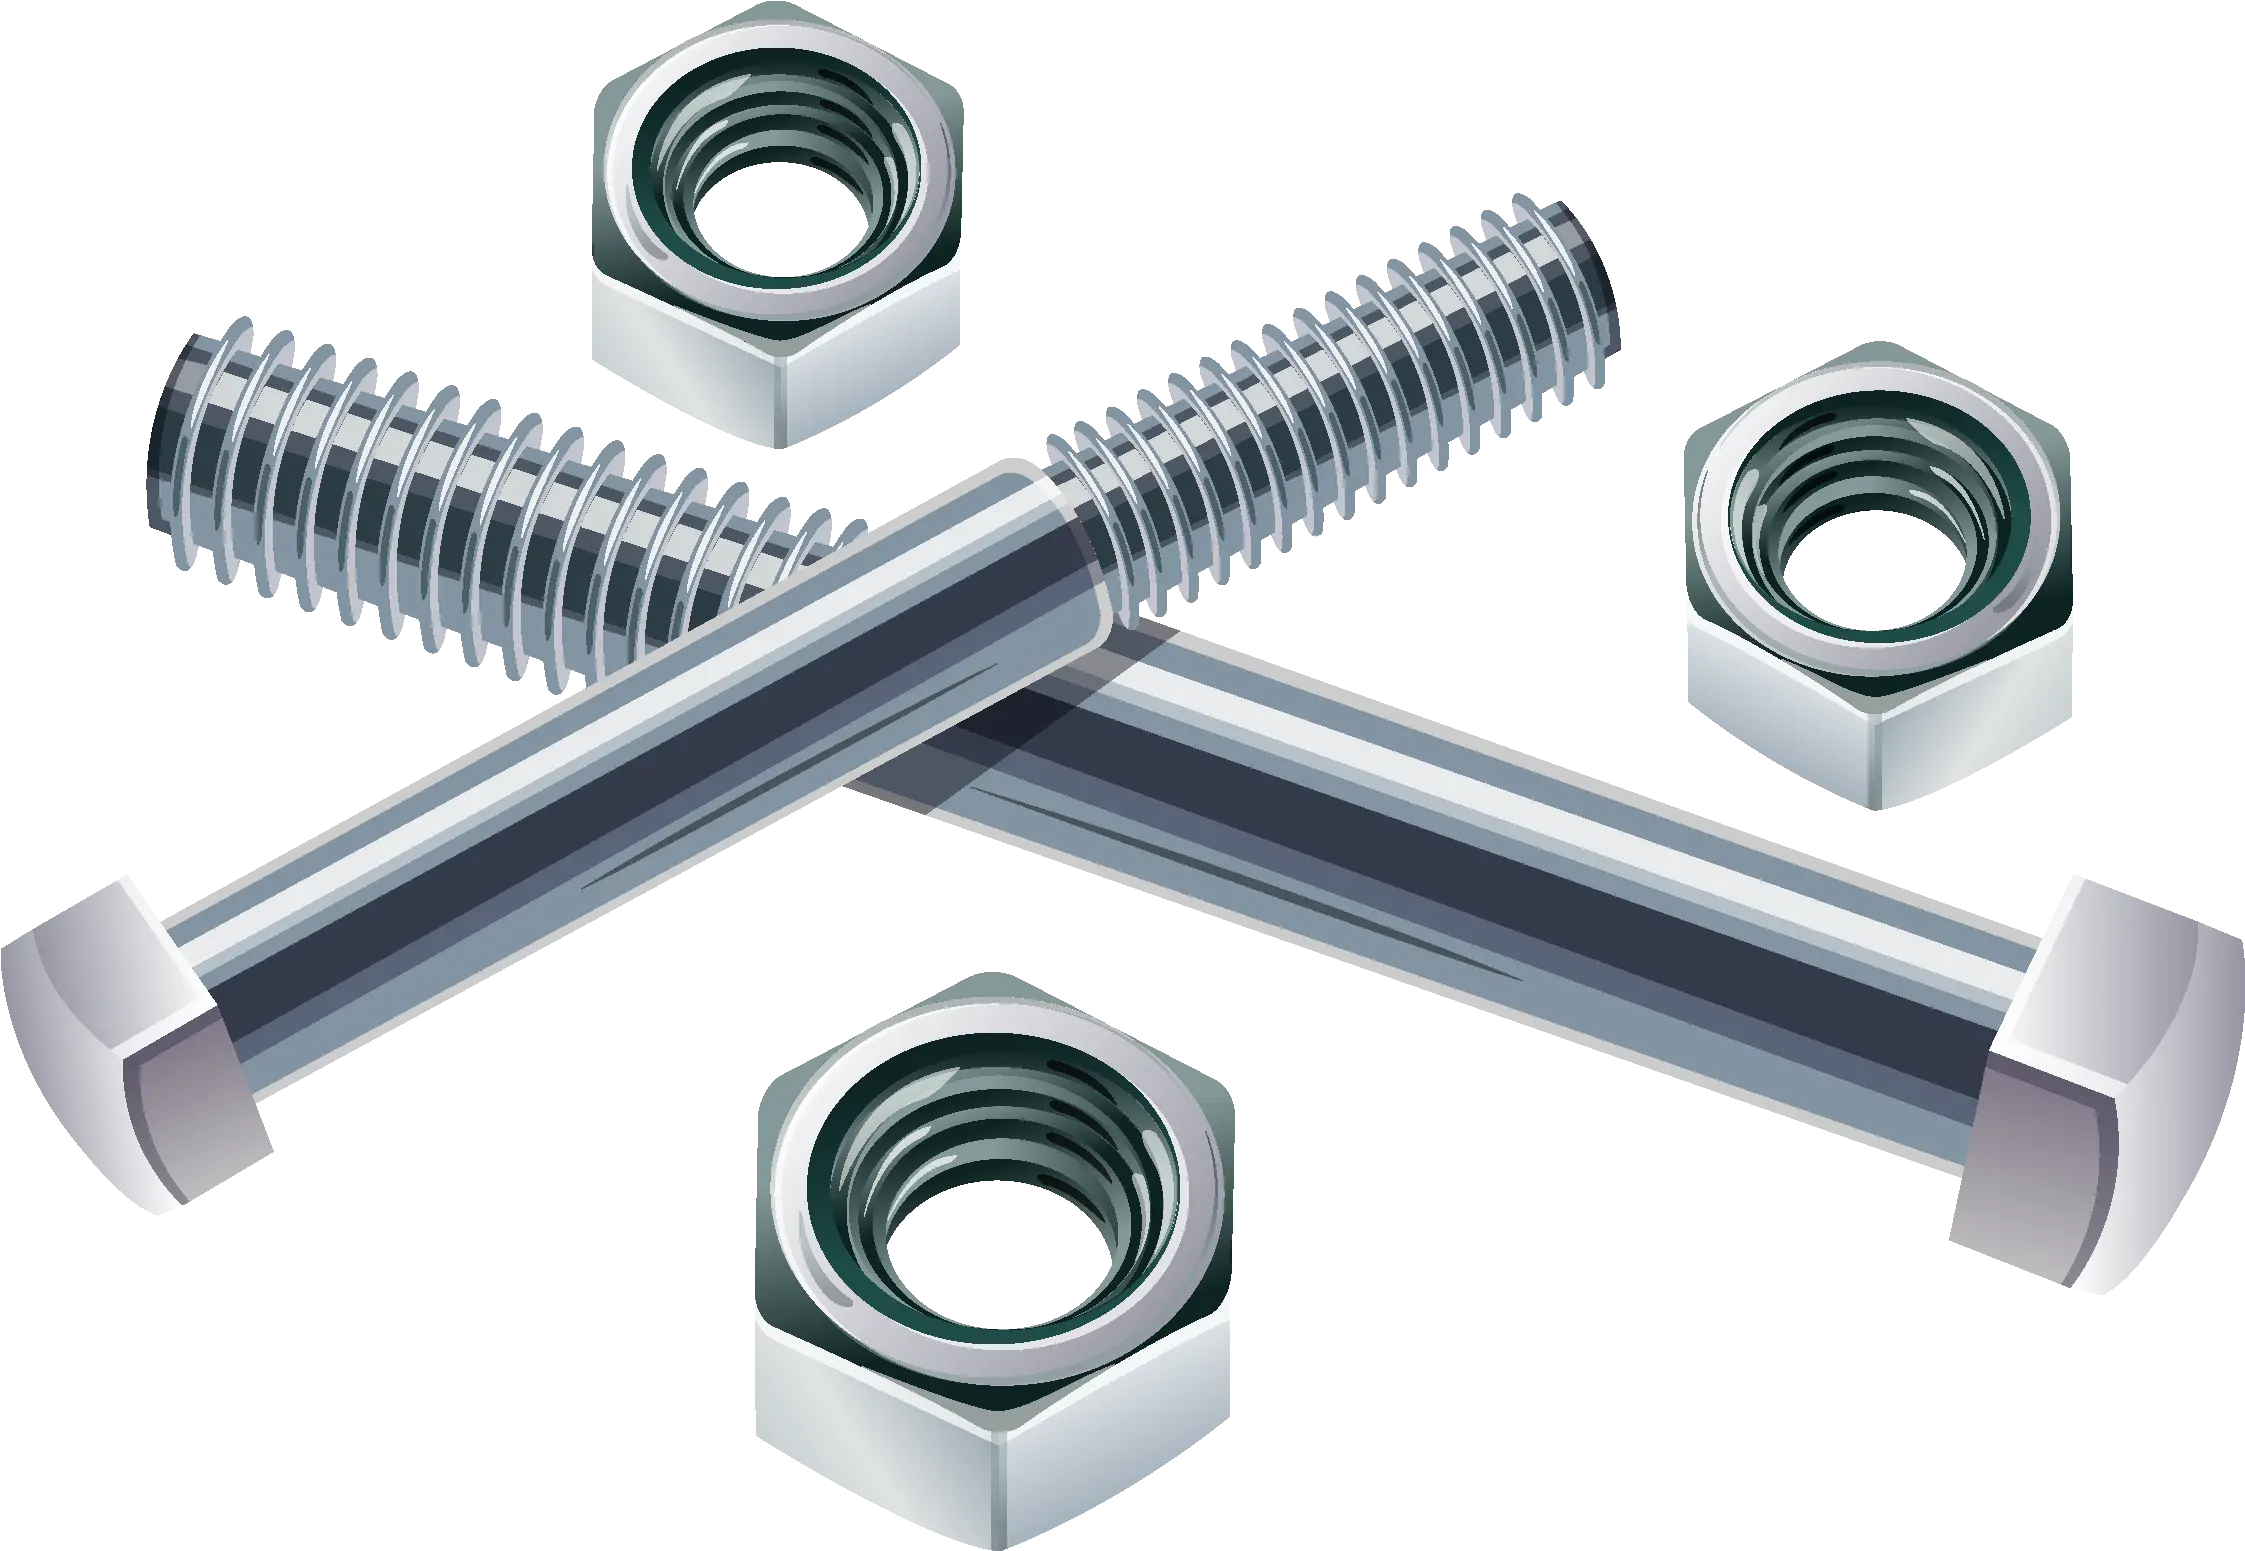 Download Graphic Nut Screw Stainless Steel Fastener Bolt And Nut Png Nut Png